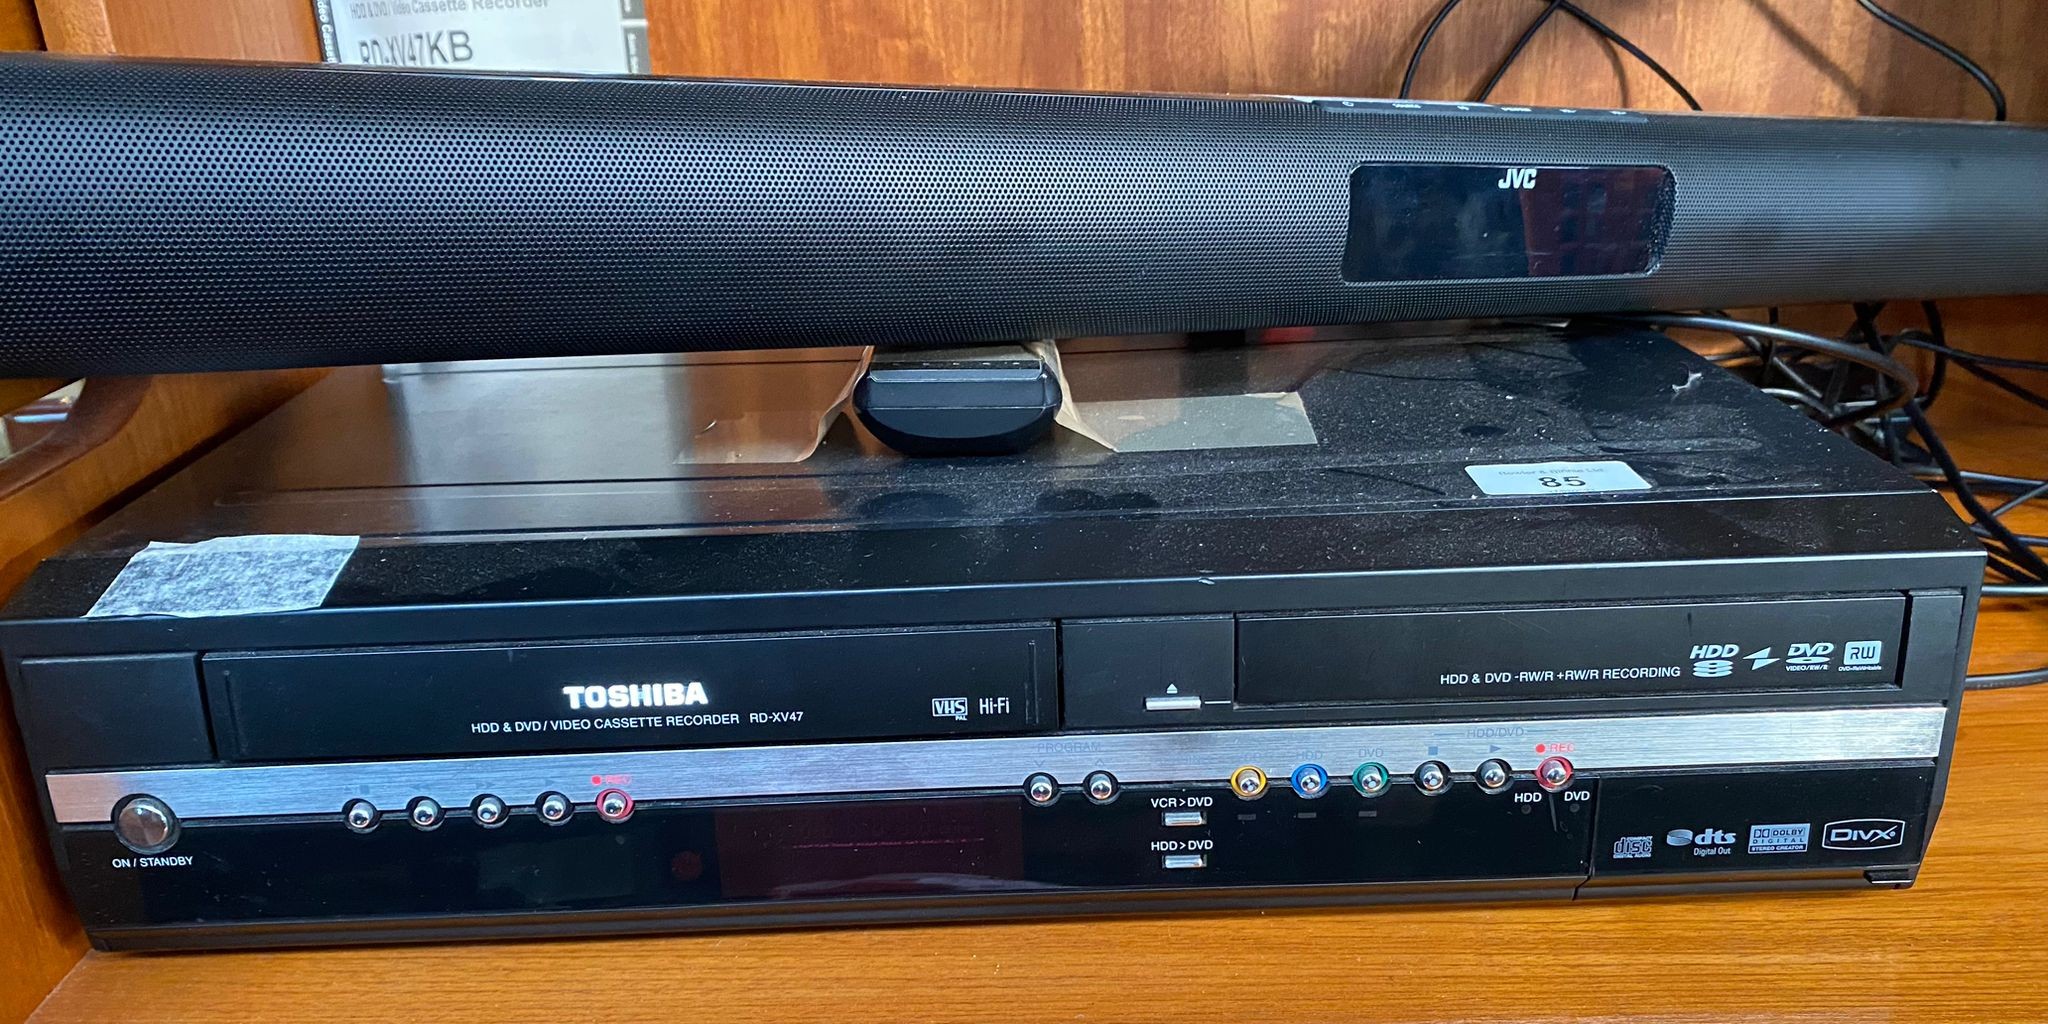 Toshiba HDD& dvd/video cassette recorder along with JVC sound bar